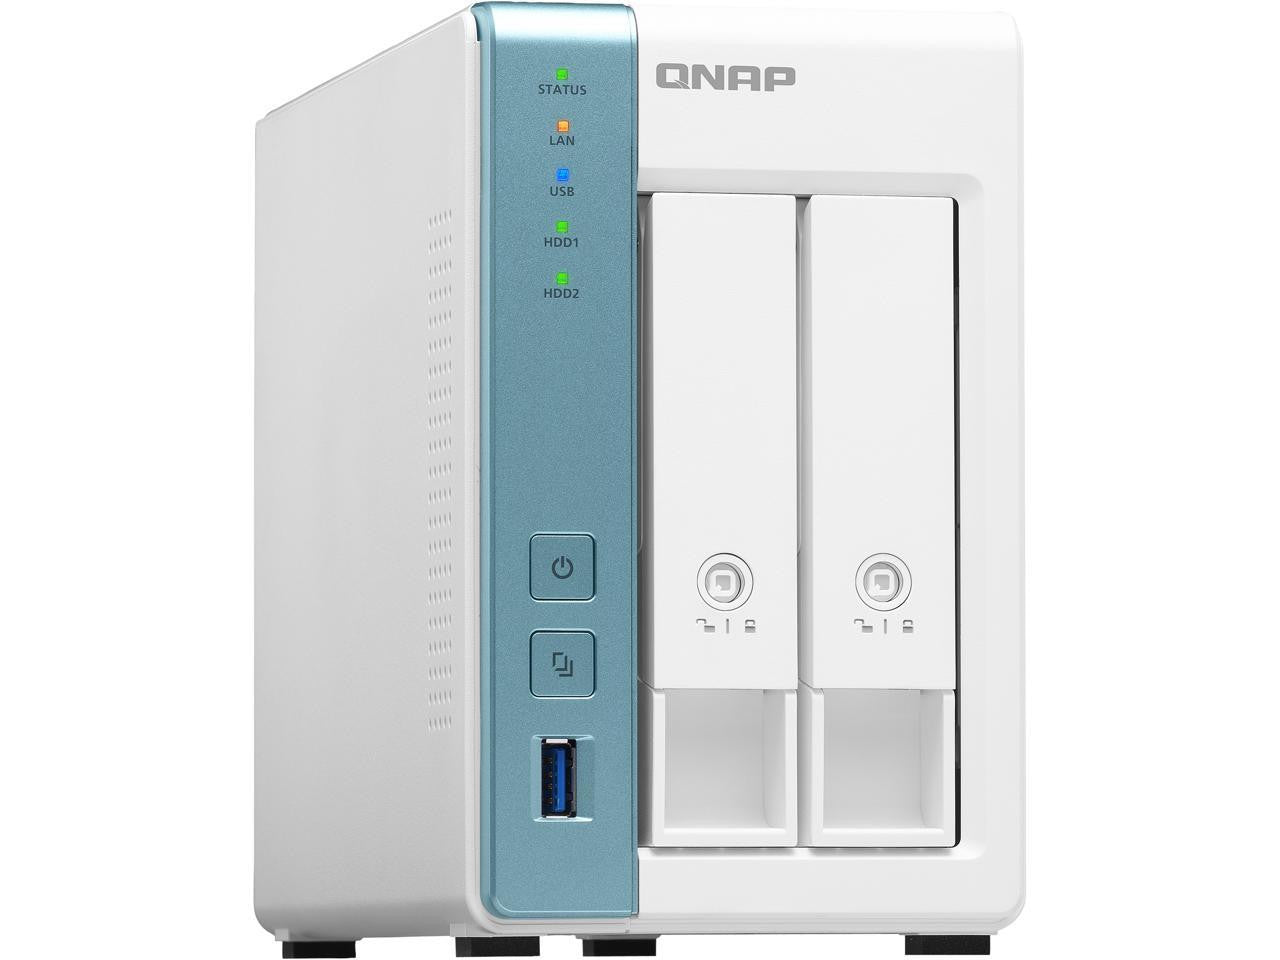 QNAP TS-231K 2-Bay Home NAS with 12TB (2 x 6TB) of Seagate Ironwolf NAS Drives Fully Assembled and Tested